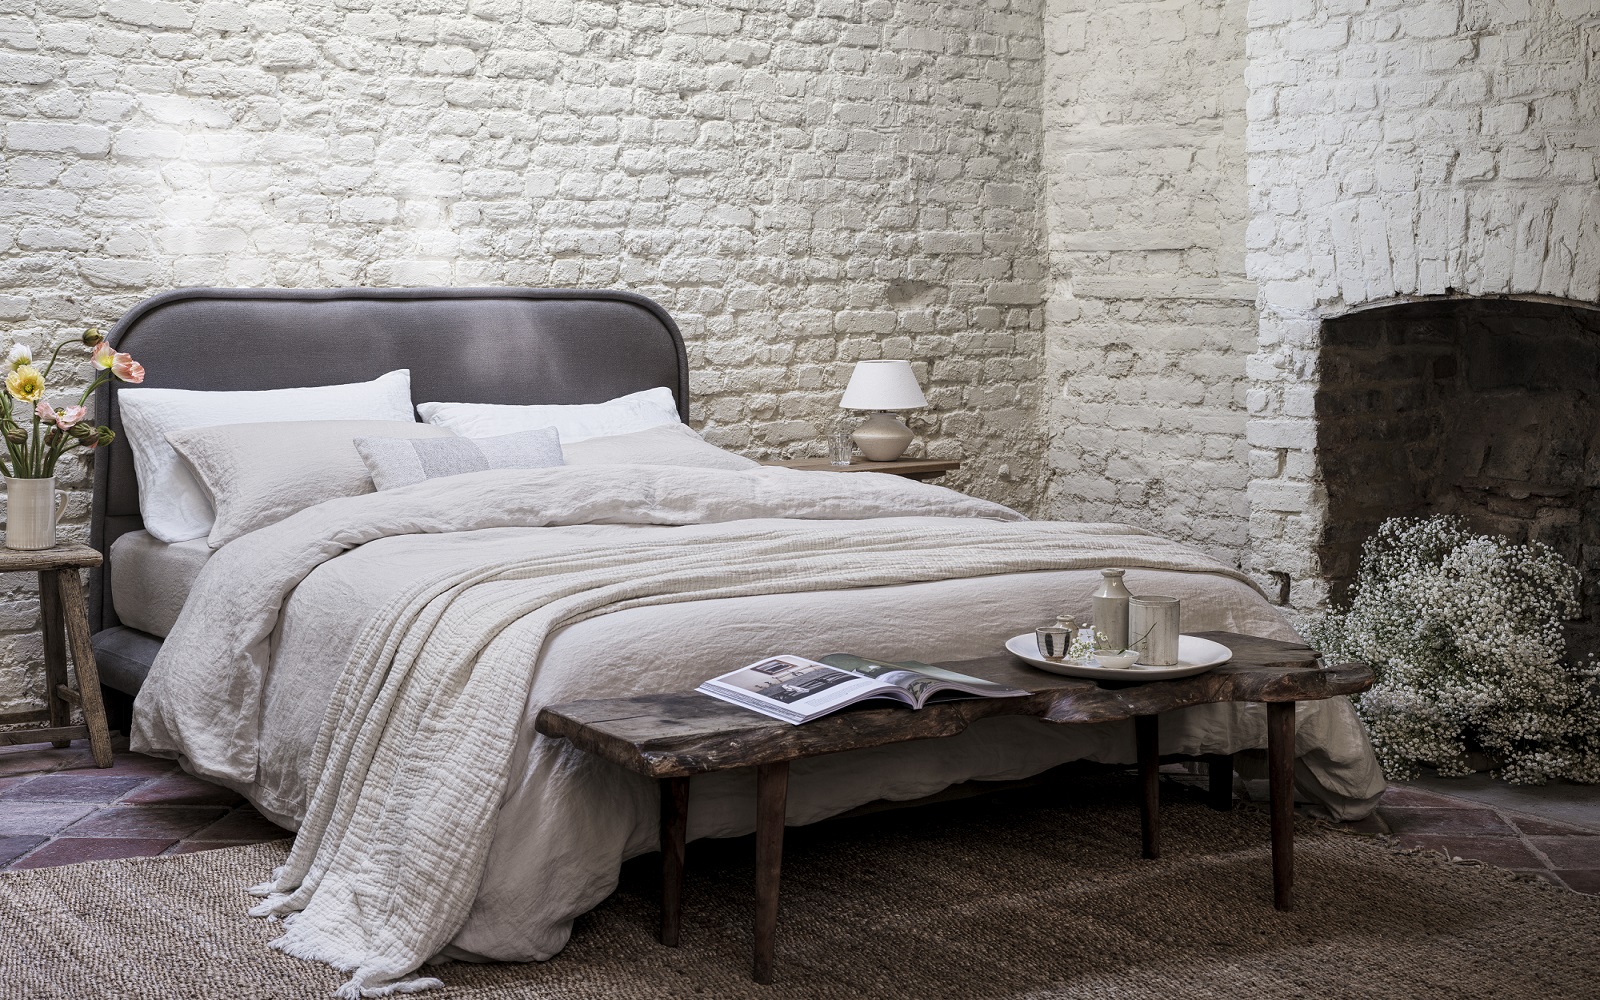 bed with painted brick setting and fireplace , made with organic naturalmat bedlinen